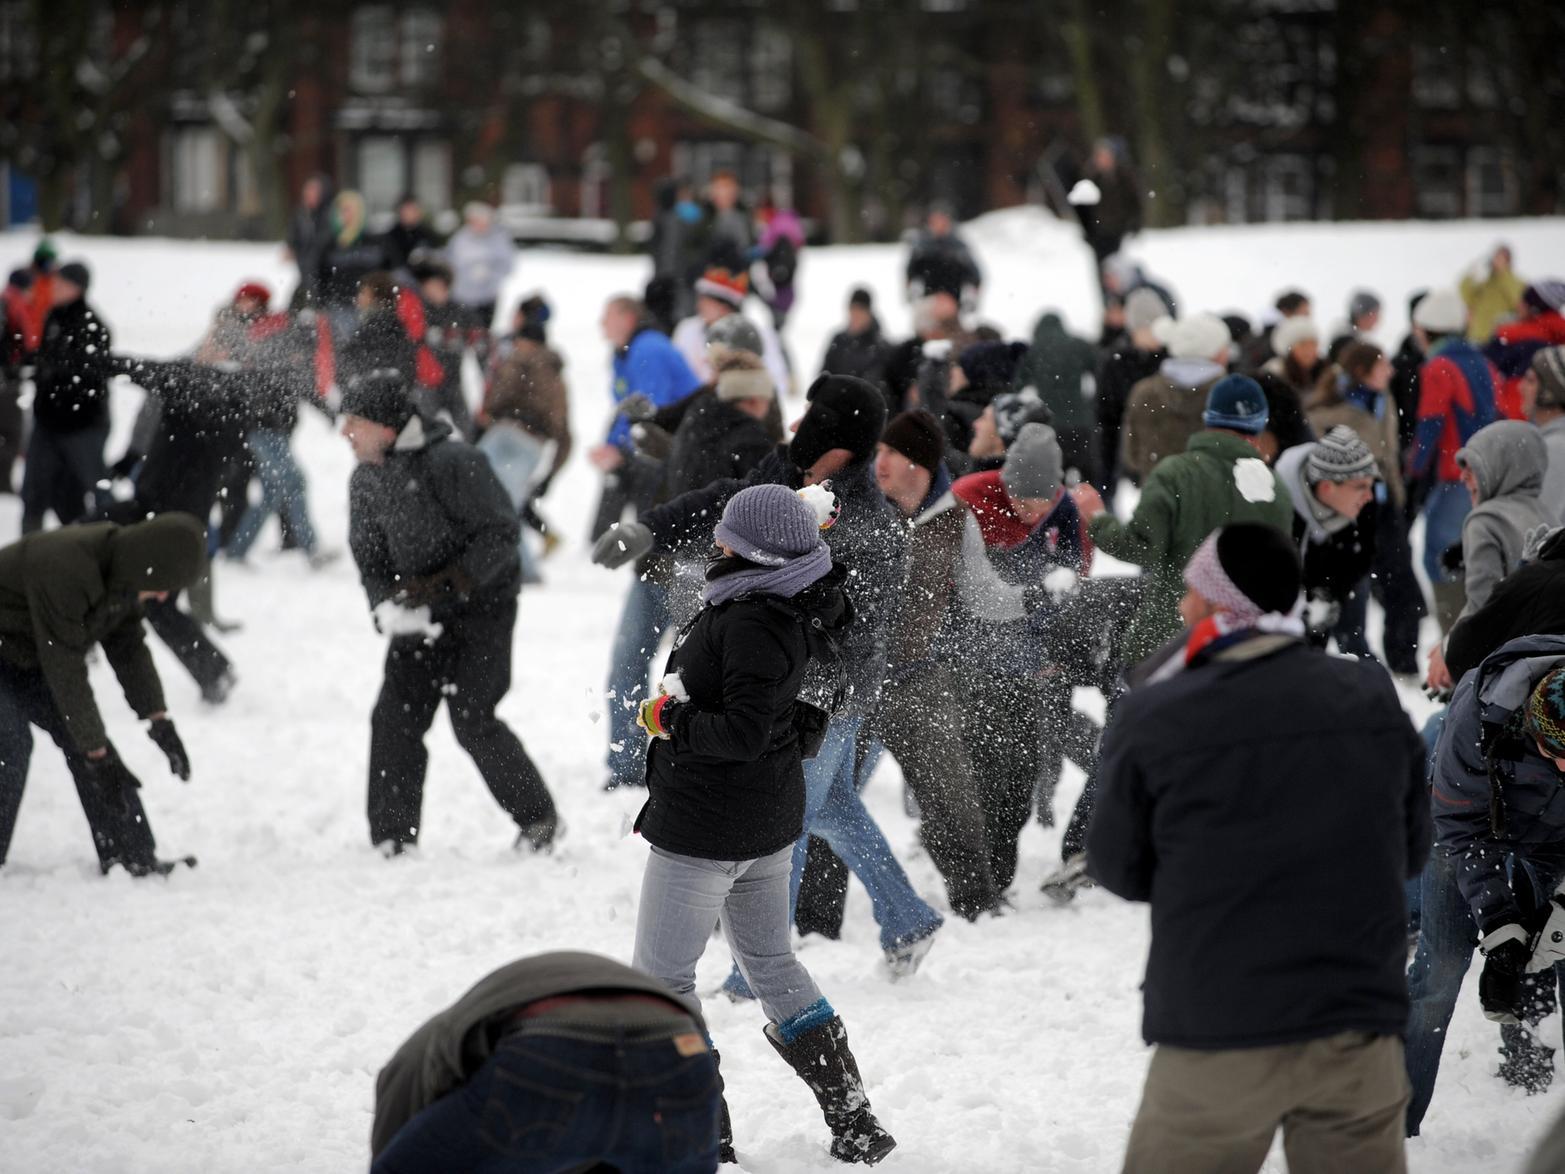 Duck and cover as hundreds enjoyed fun in the snow.